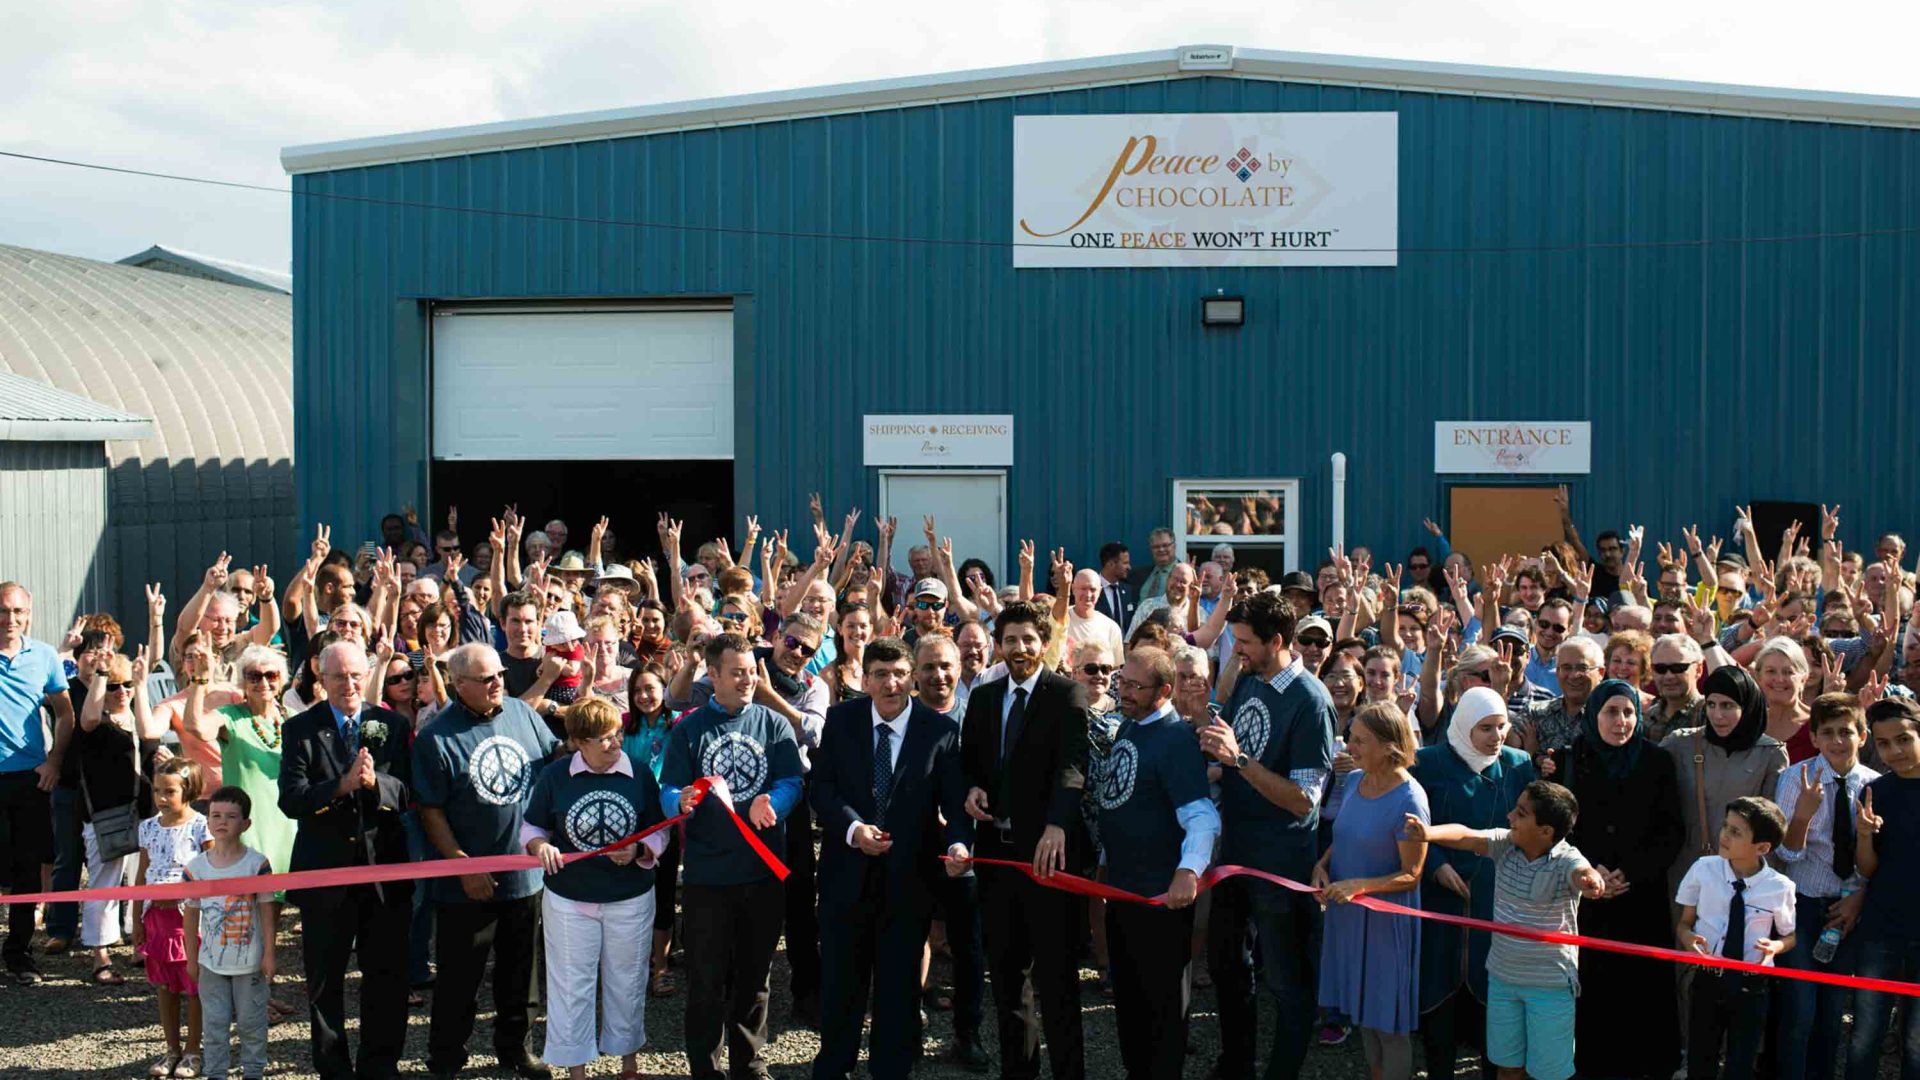 Surrounded by family and community, Isam and Tareq Hadhad cut the ribbon at the grand opening of the Peace by Chocolate factory.